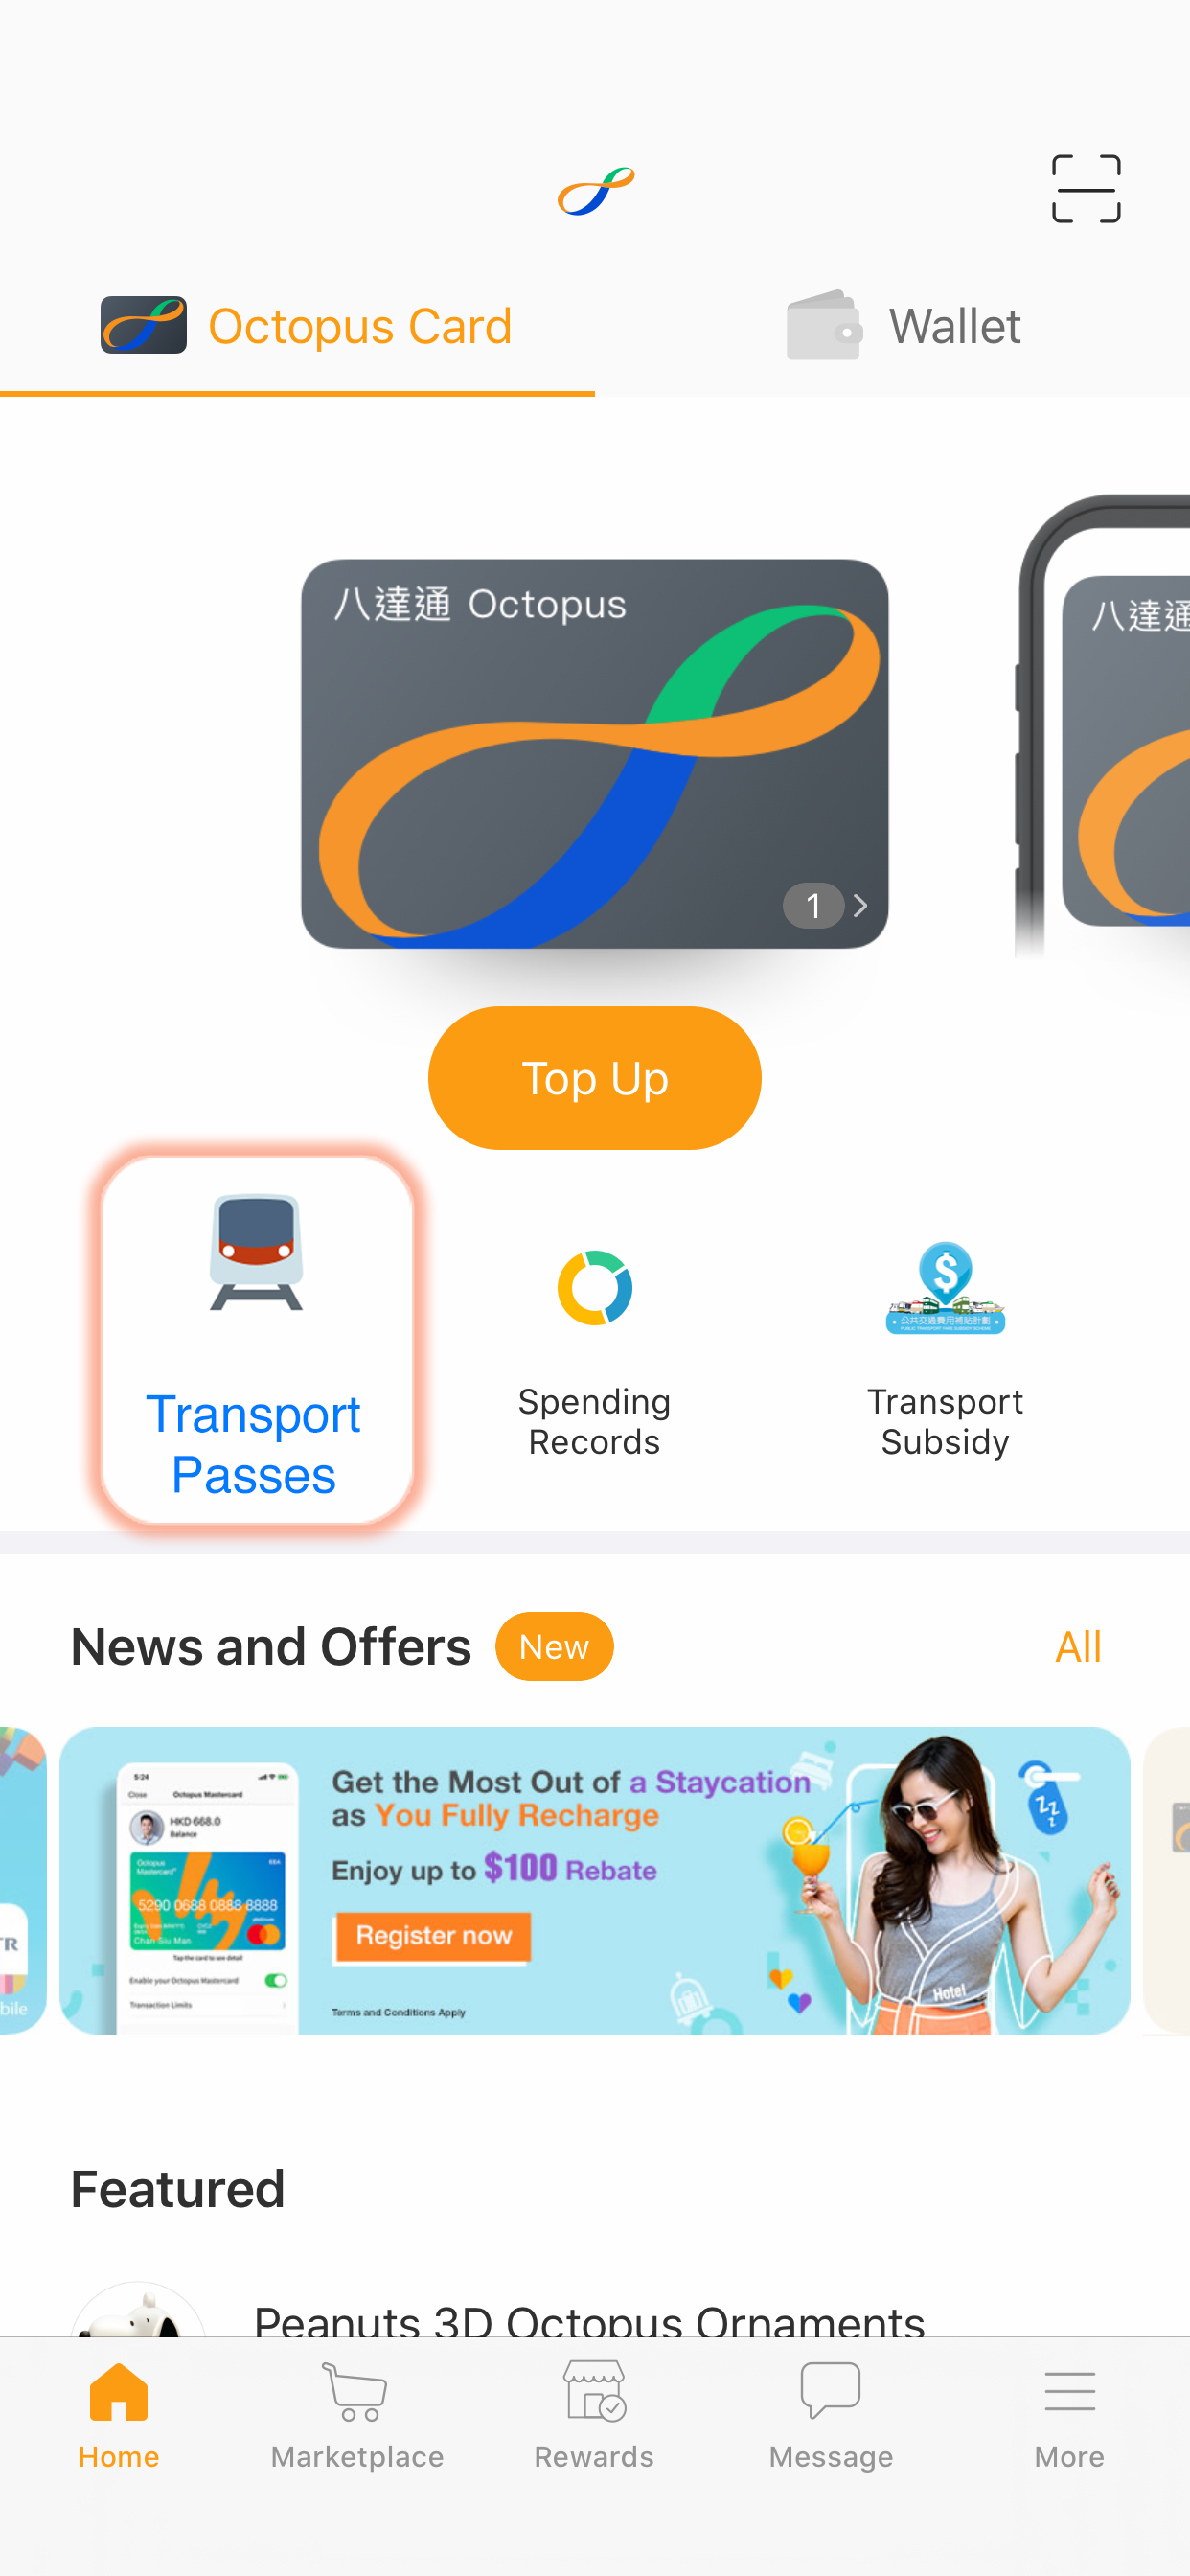 Select 'Transport Passes' on Octopus App Homepage